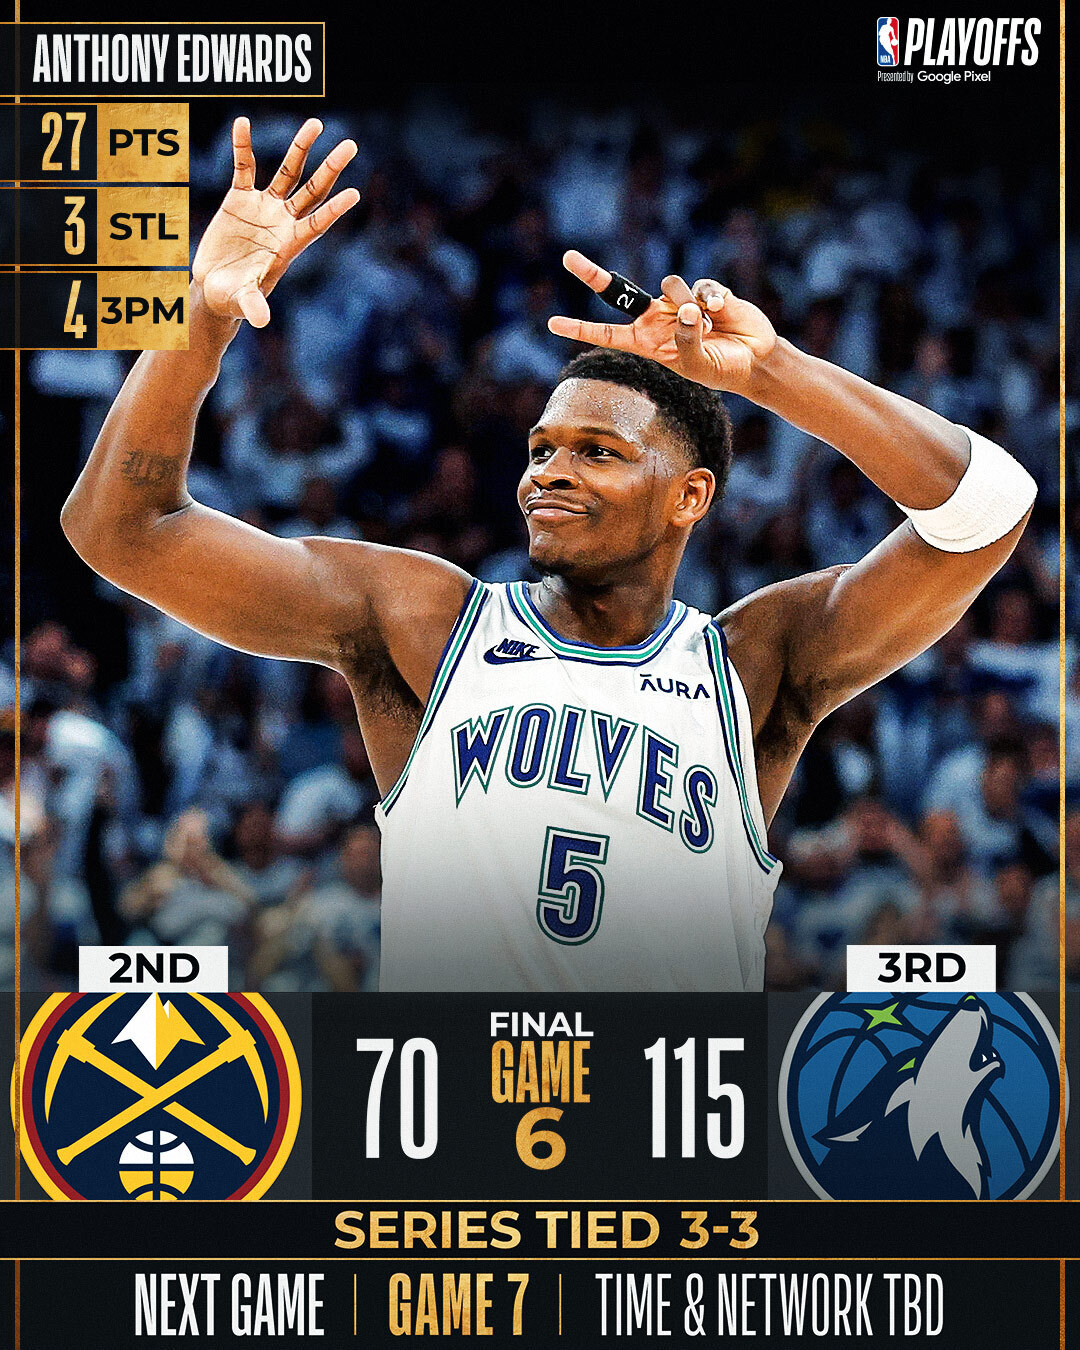 Wolves dominate over the unwatchable Nuggets.  We go to sport 7